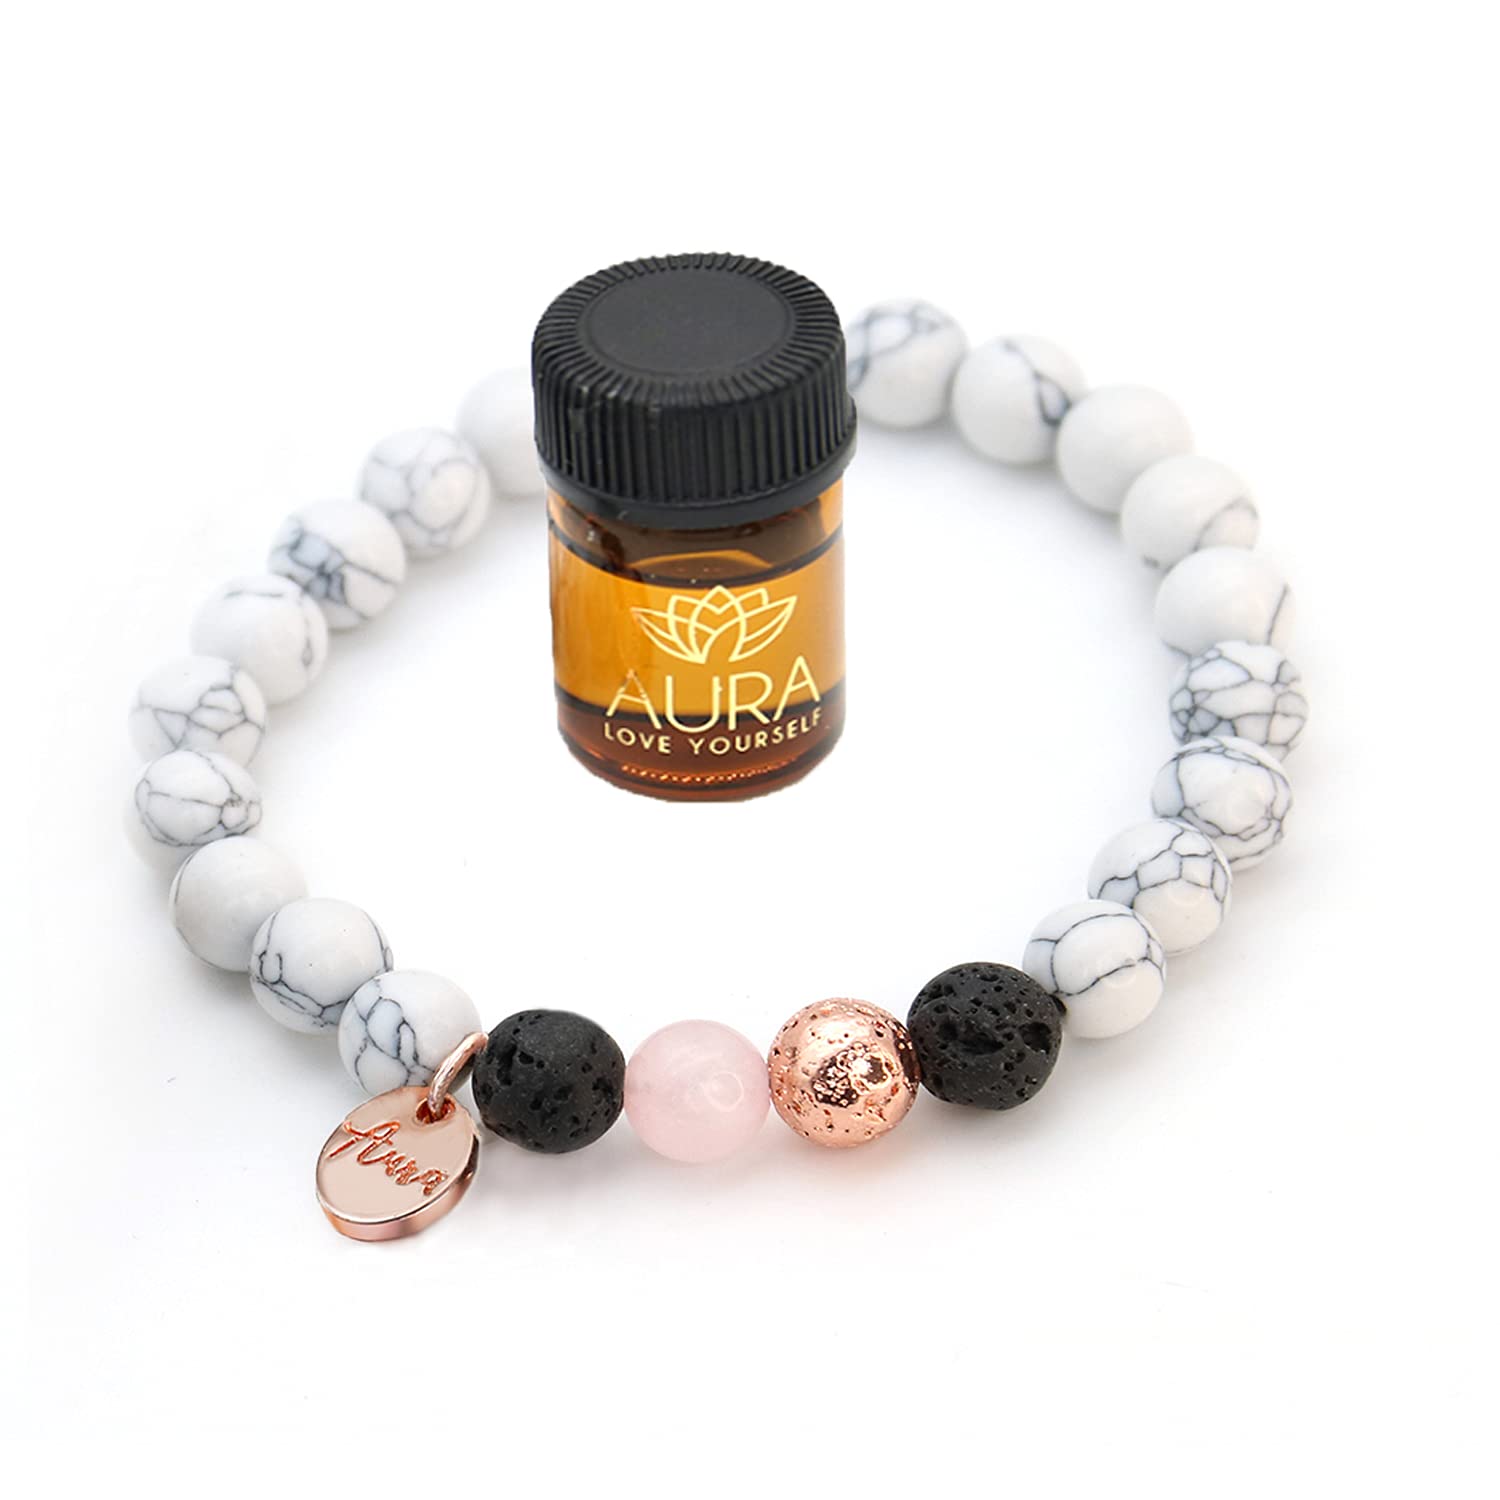 Howlite Bracelet with Rose Quartz, Crystals and Healing Gemstone Jewelry for Anxiety Stress Relief Gifts, Lava Beads - Lava Rock Bracelets for Women Men - White Natural Stone Bracelet Oil Diffuser